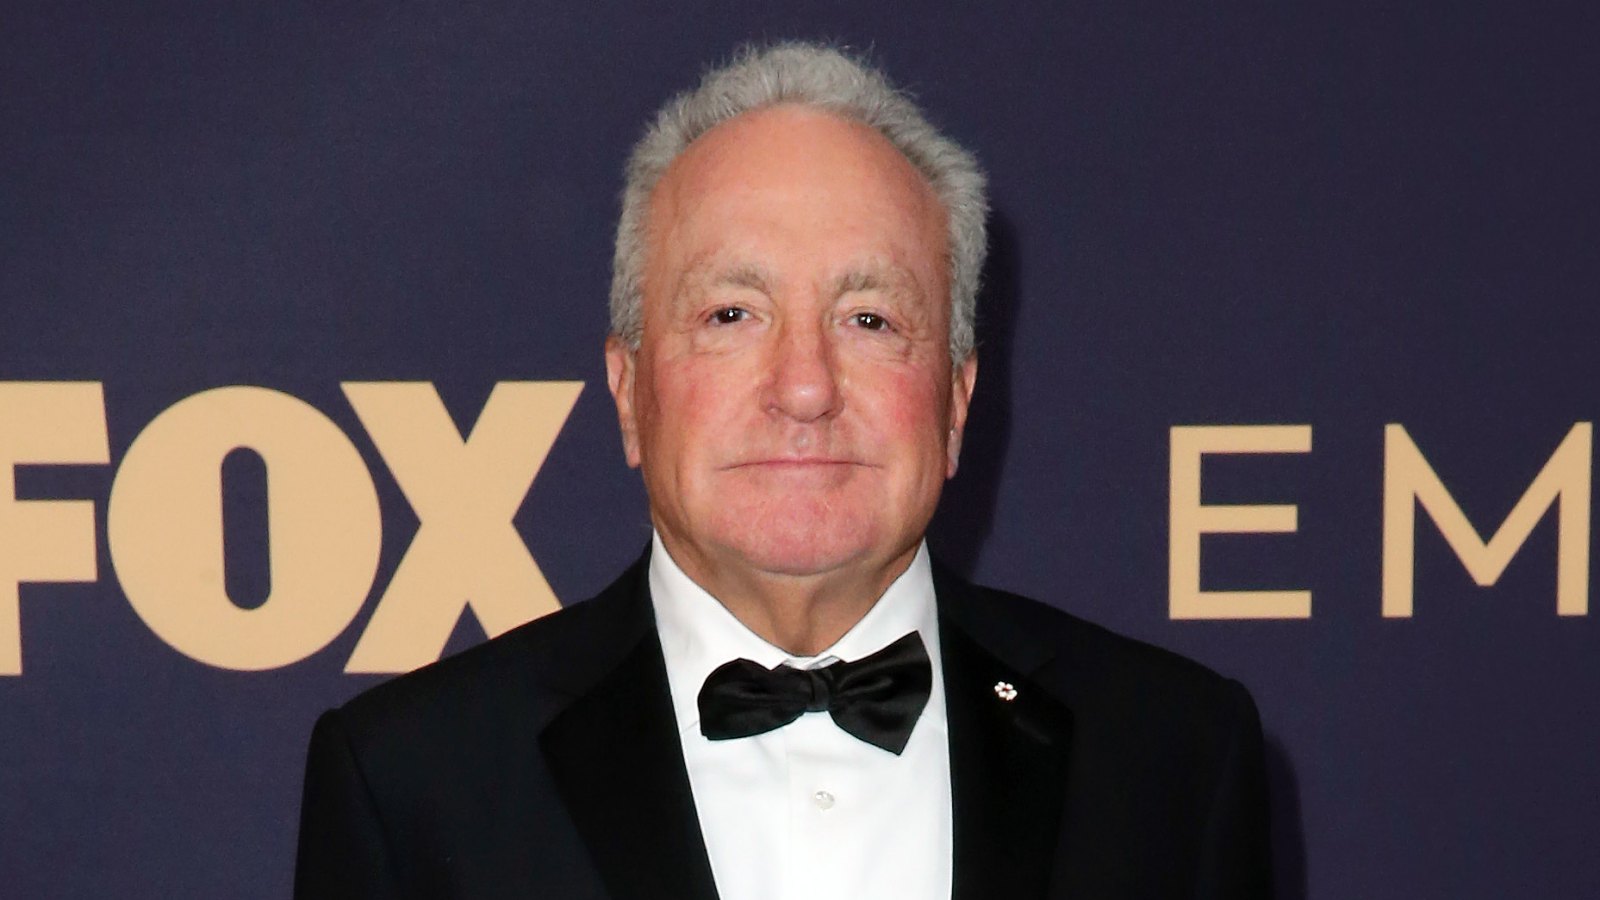 Lorne Michaels, Biography, Saturday Night Live, & Facts